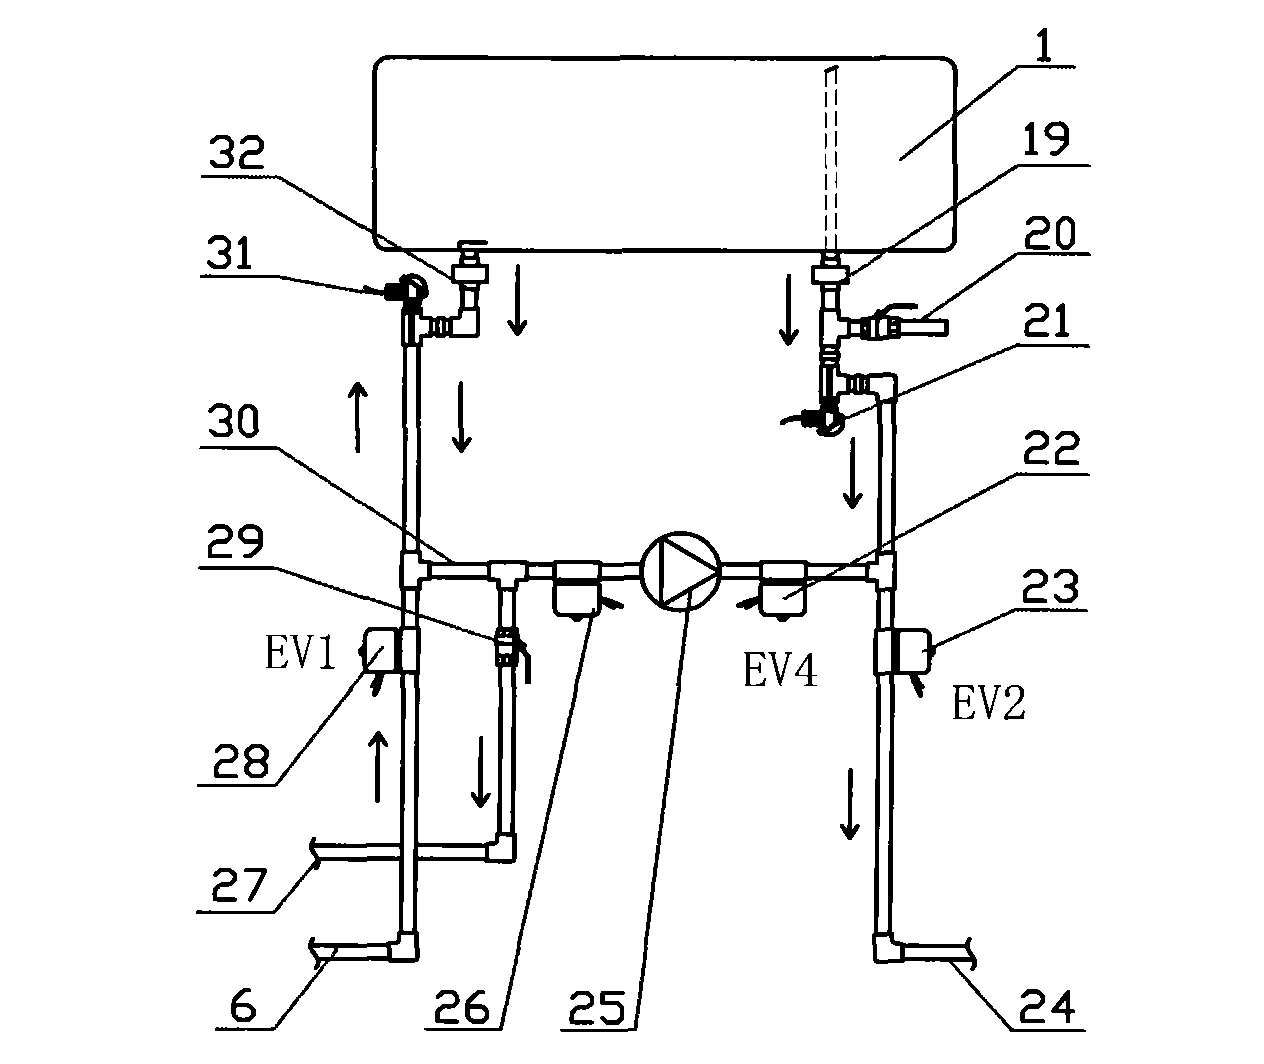 Thermal performance detection system and method for balcony wall-mounted solar water heater